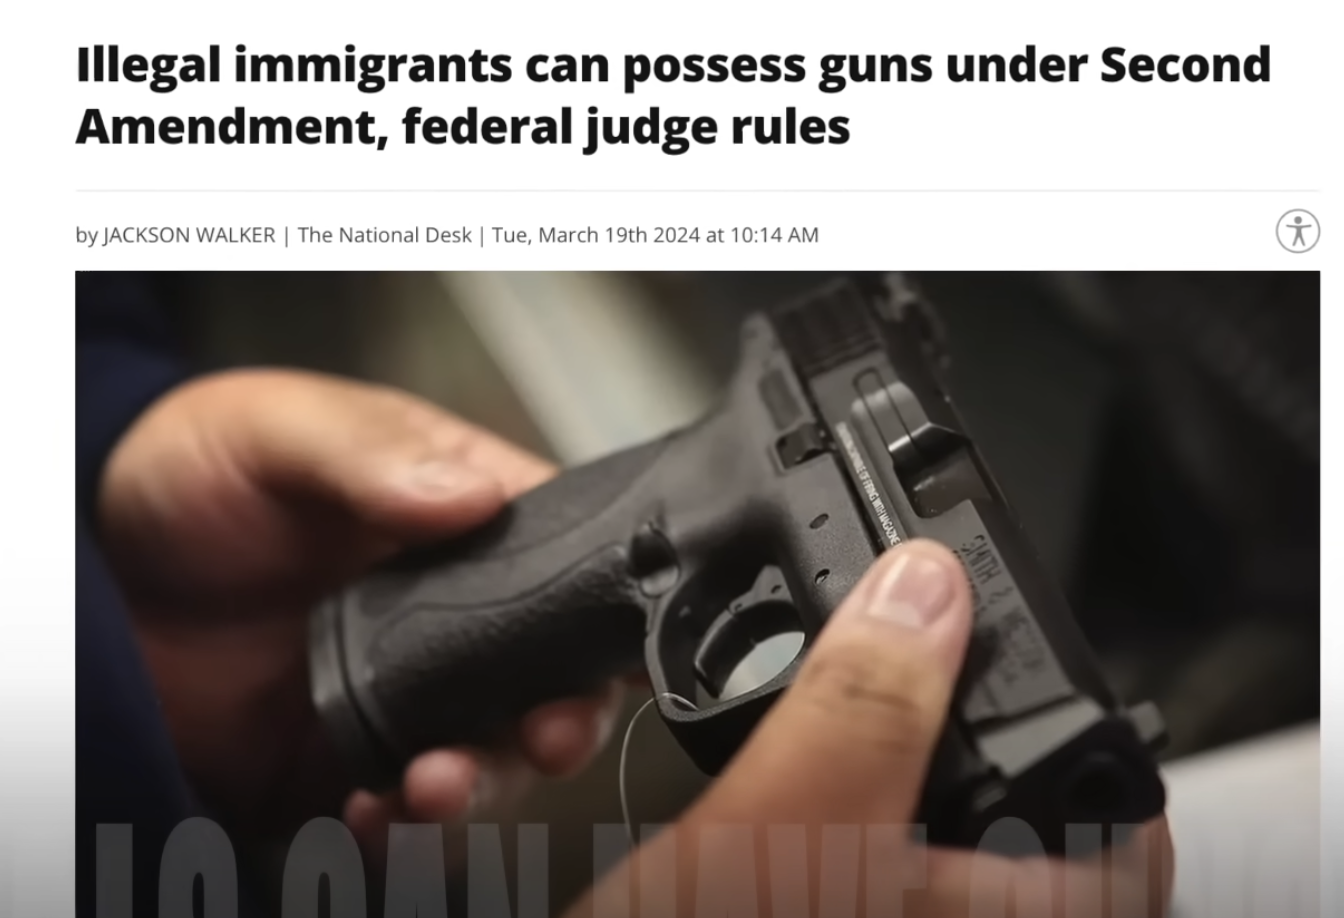 Obama Judge Approves Illegals' Carrying Guns